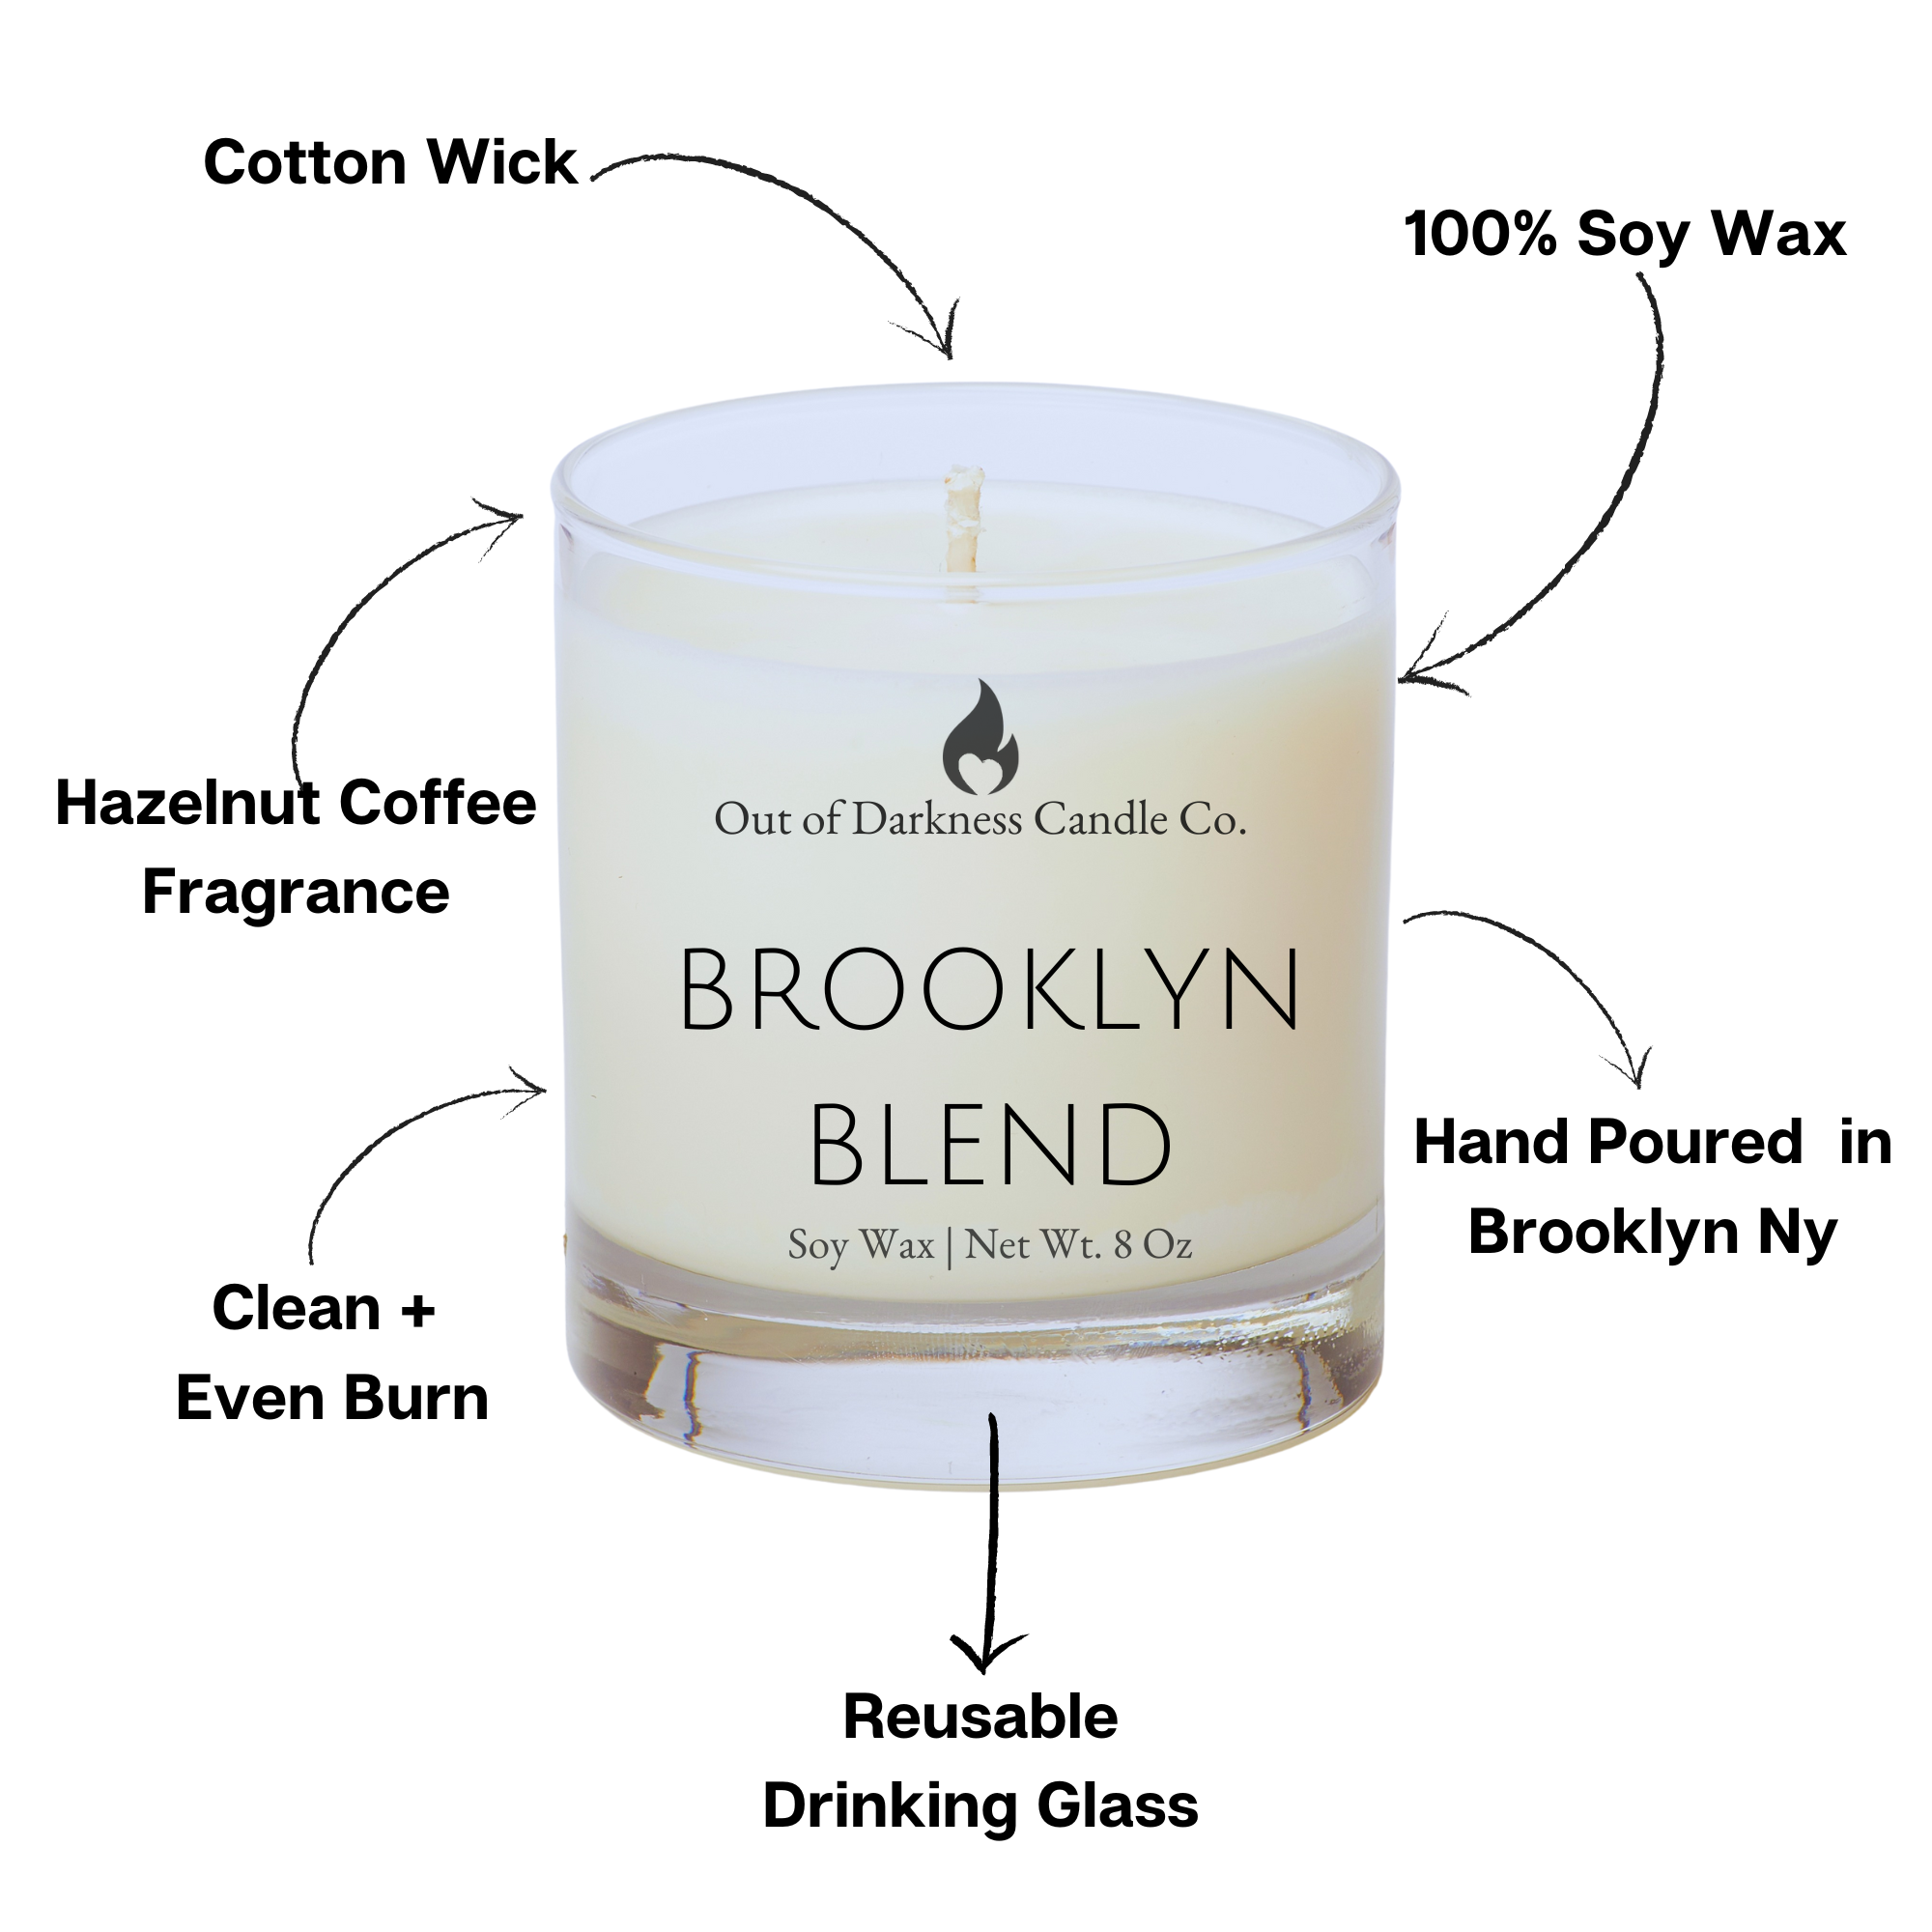 Clear Glass Jar 8 oz Soy Candle that has a black flame company logo on the top- Out of Darkness Candle Co right beneath it In larger letters centered in the middle it states Brooklyn Blend in all caps and below that Soy Wax Net Wt. 8 oz Around the candle are arrows that describe what is in the candle- 100% Soy Wax, Cotton Wick, Hand Poured in Brooklyn NY Resuable Drinking Glass, Clean and Even Burn,Hazelnut Coffee Fragrance